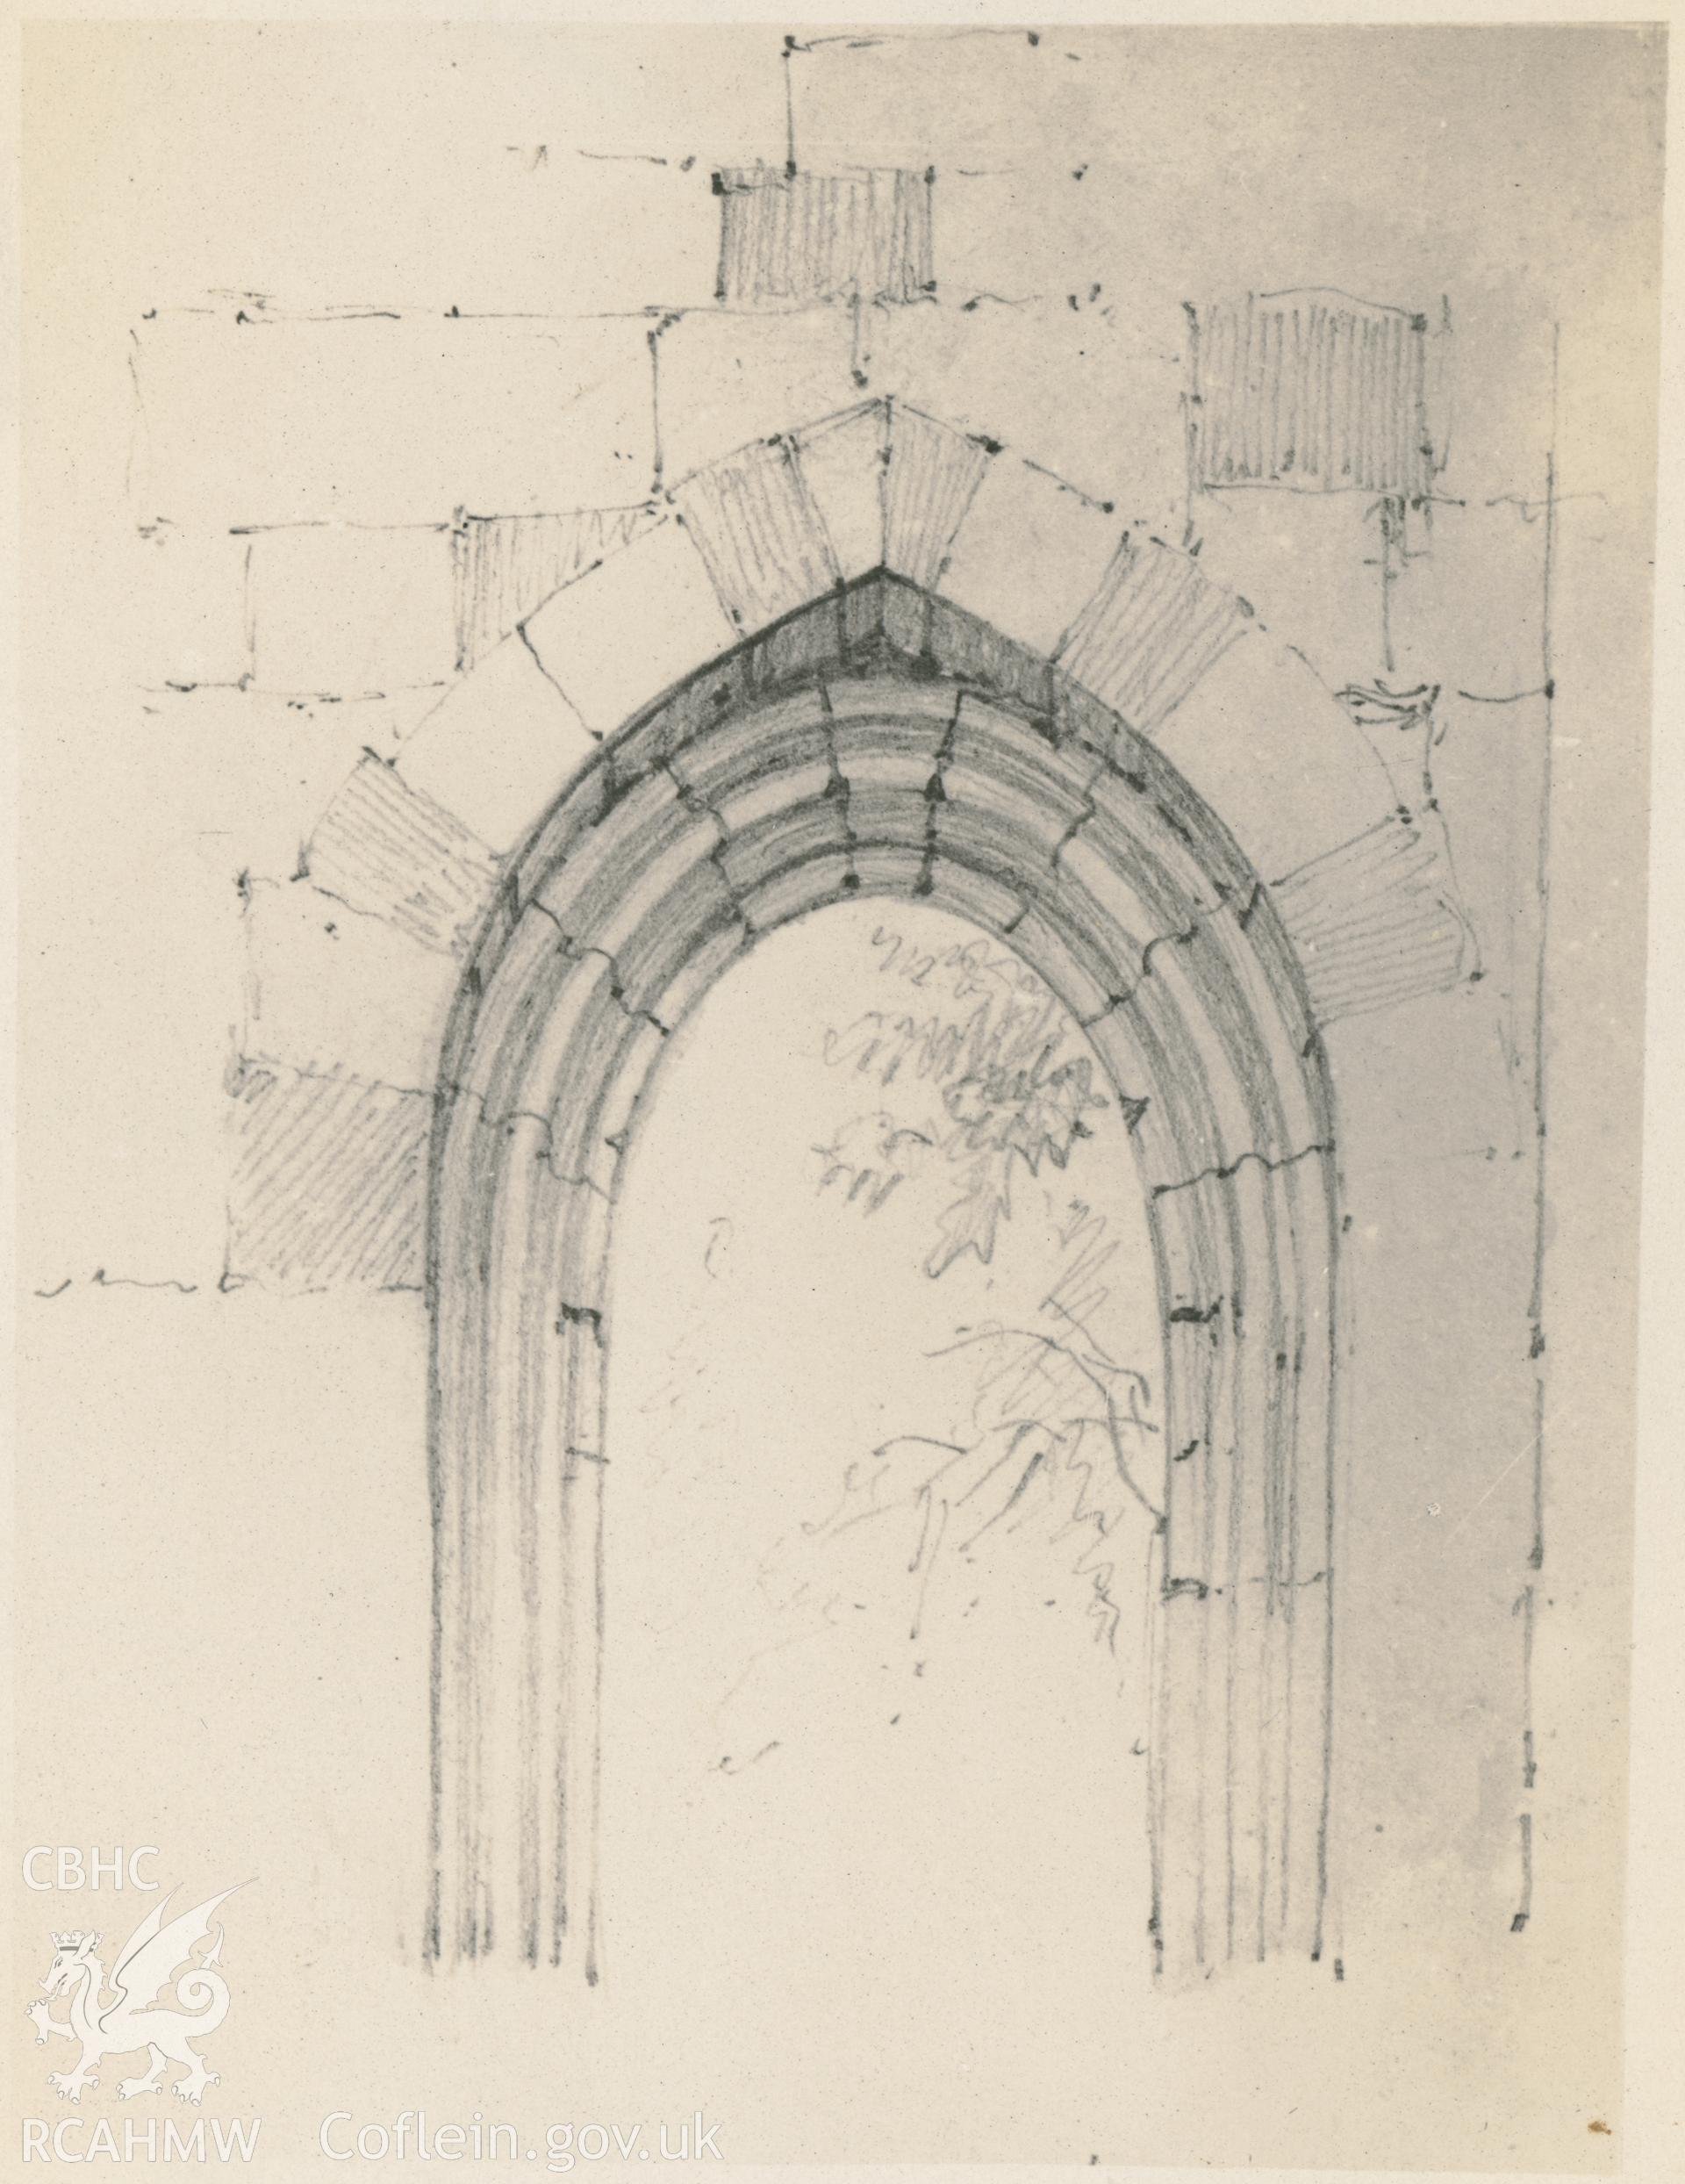 Photograph by Macbeth of an early pencil sketch showing archway at Valle Crucis Abbey.